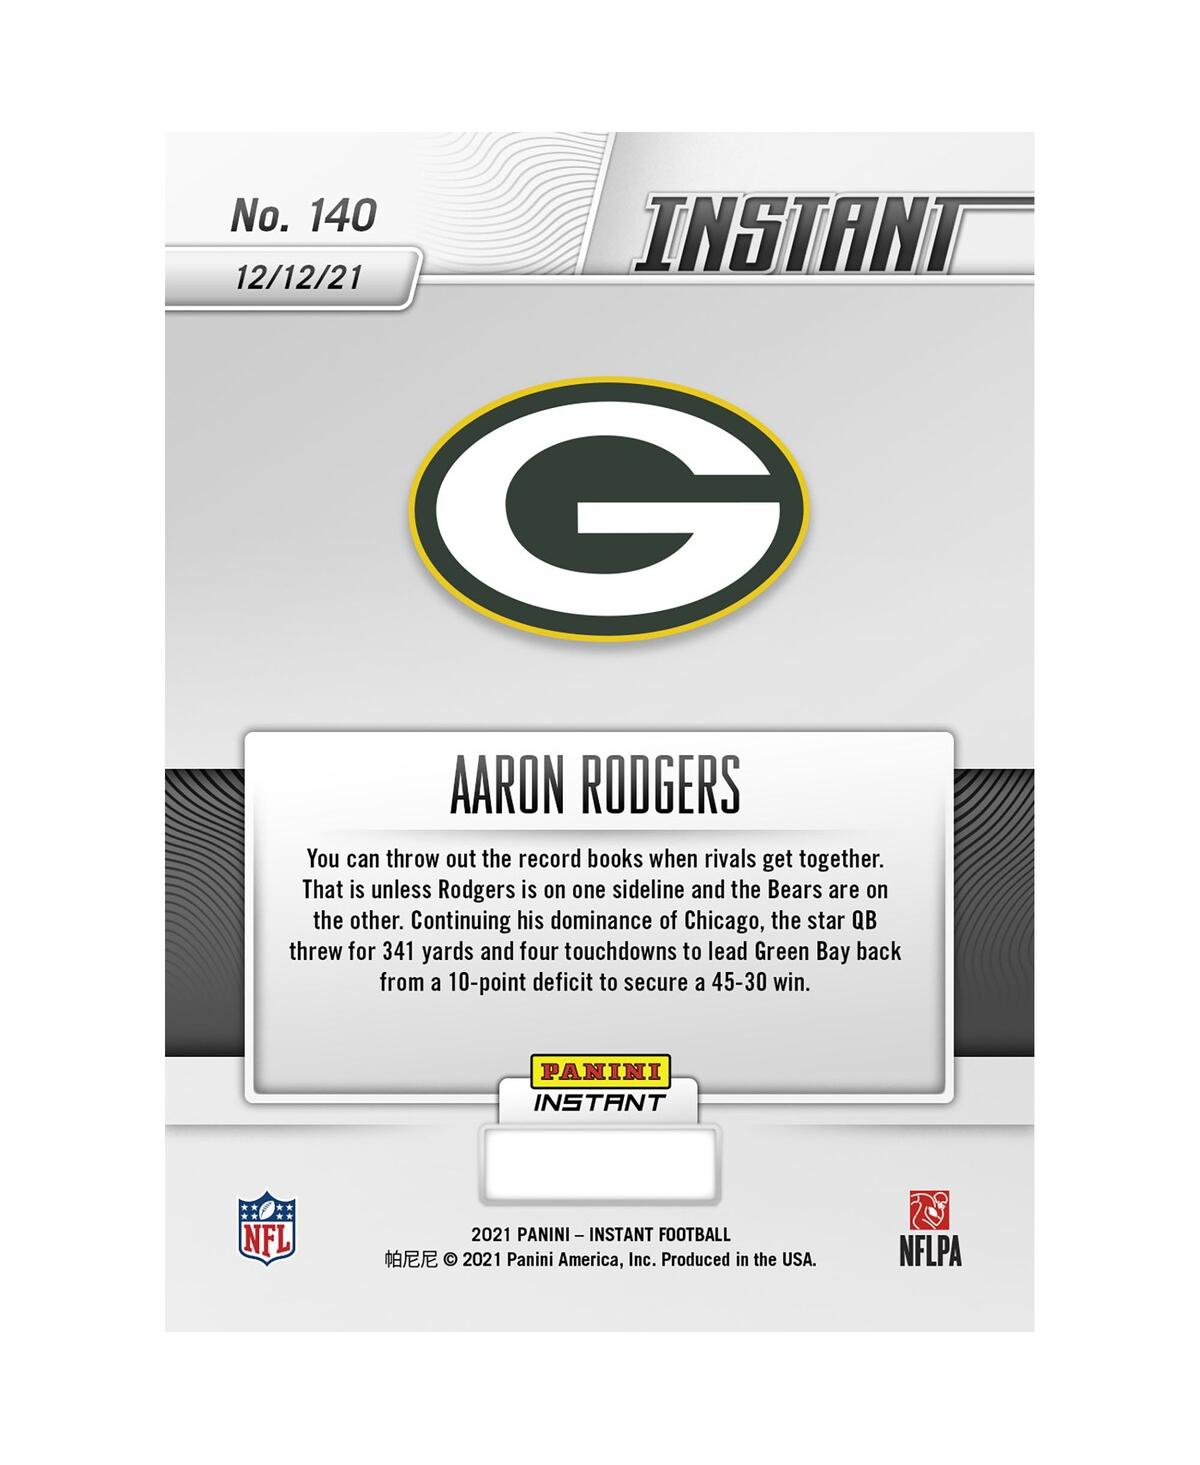 Shop Panini America Aaron Rodgers Green Bay Packers Parallel  Instant Nfl Week 14 Rodgers Leads Packers To In Multi